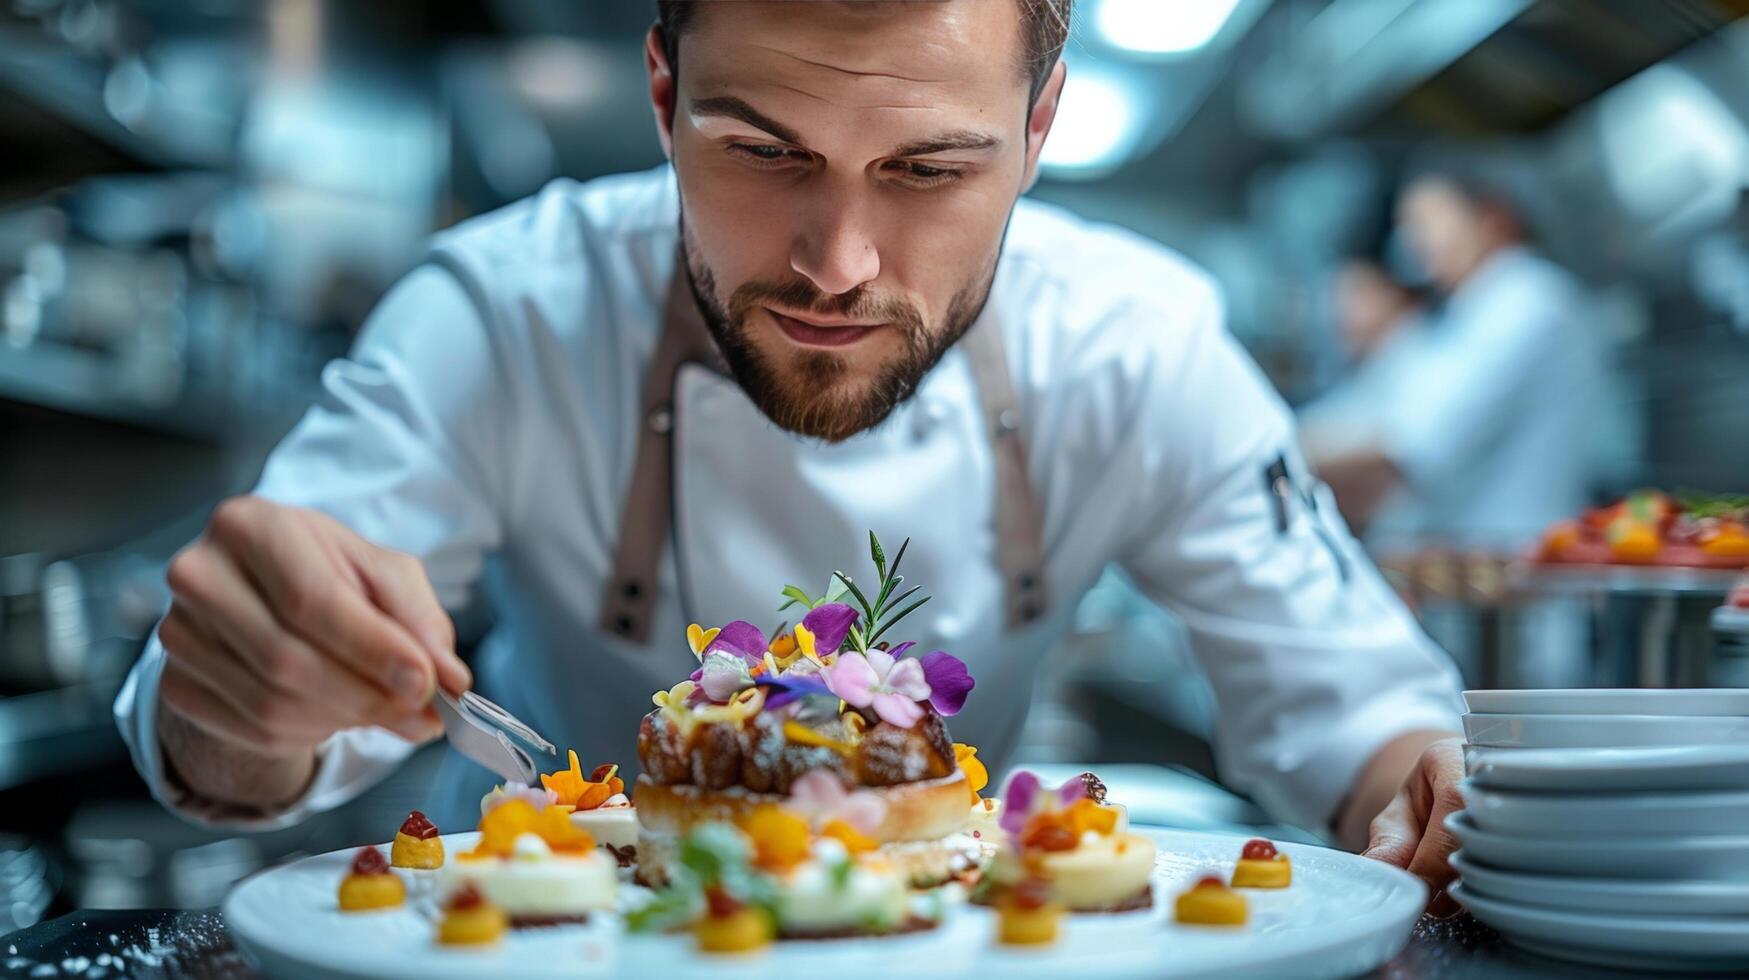 AI generated Chef in Uniform Preparing Food on Plate photo